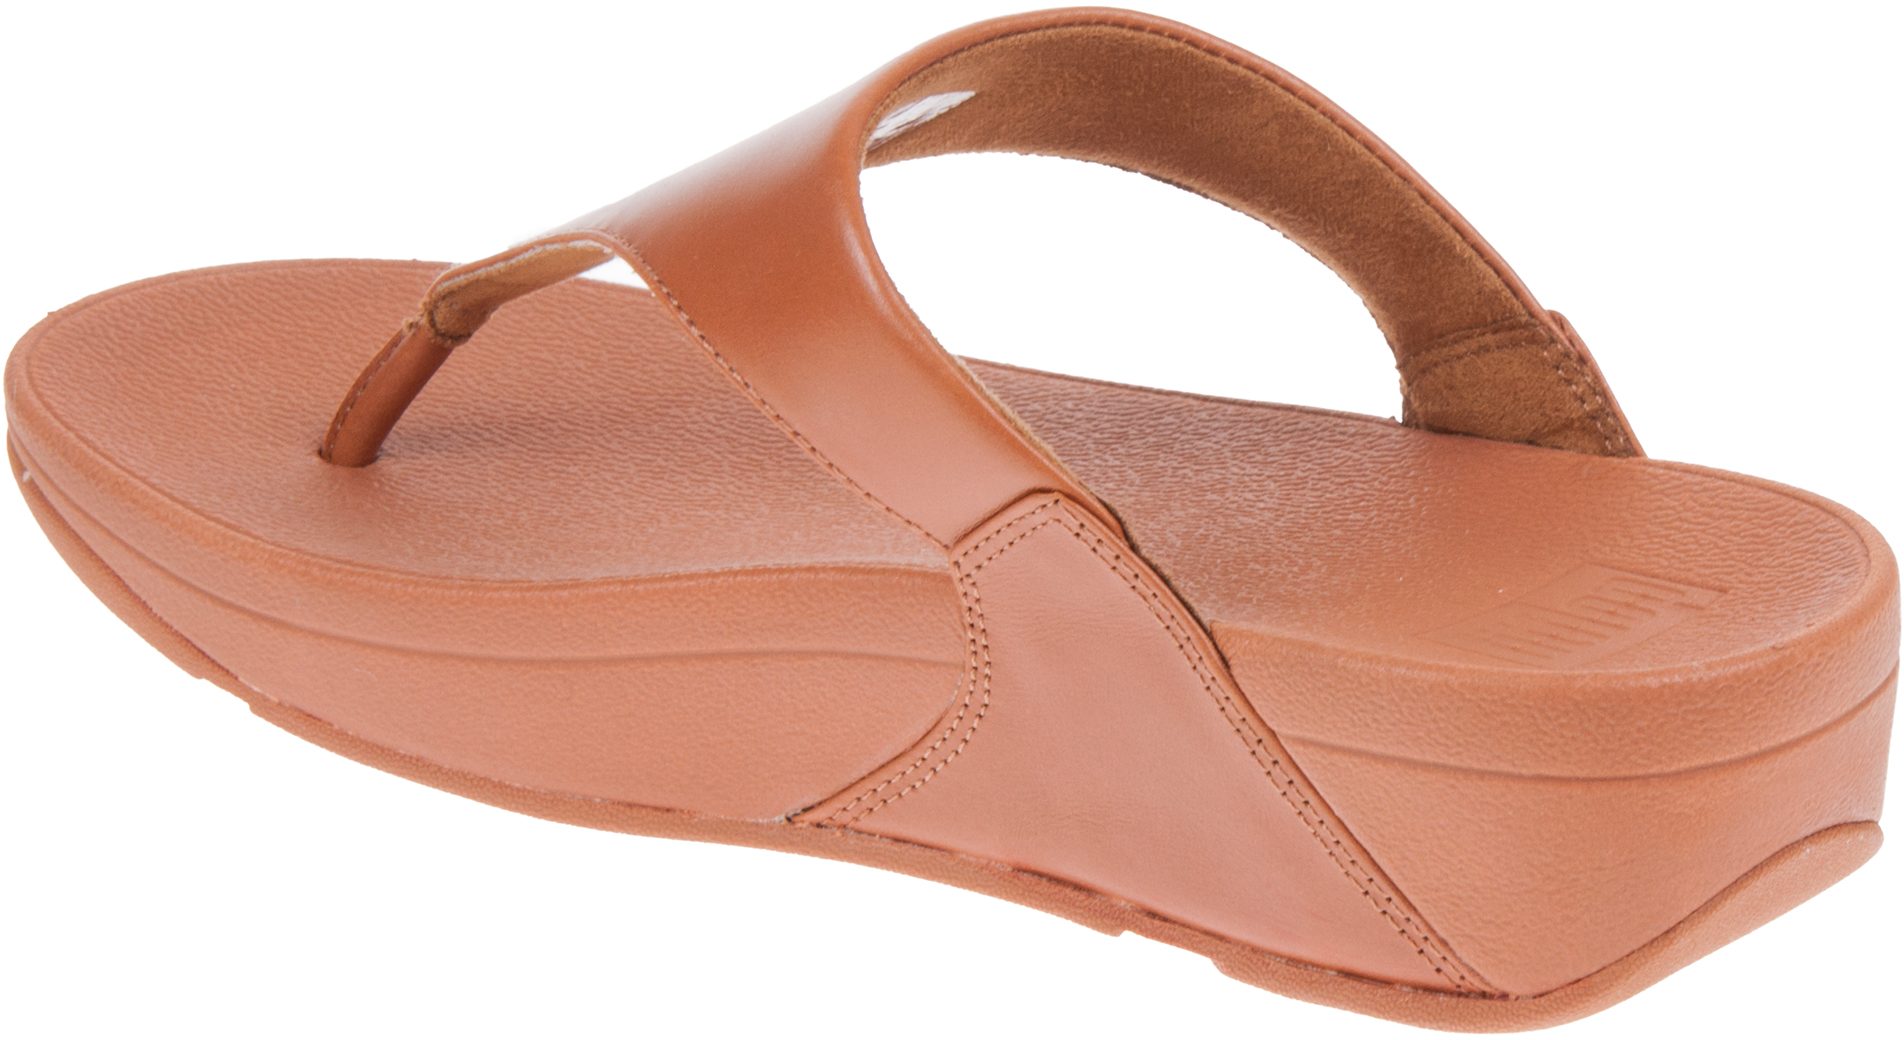 FitFlop Lulu Leather Caramel I88-098 - Toe Post Sandals - Humphries Shoes